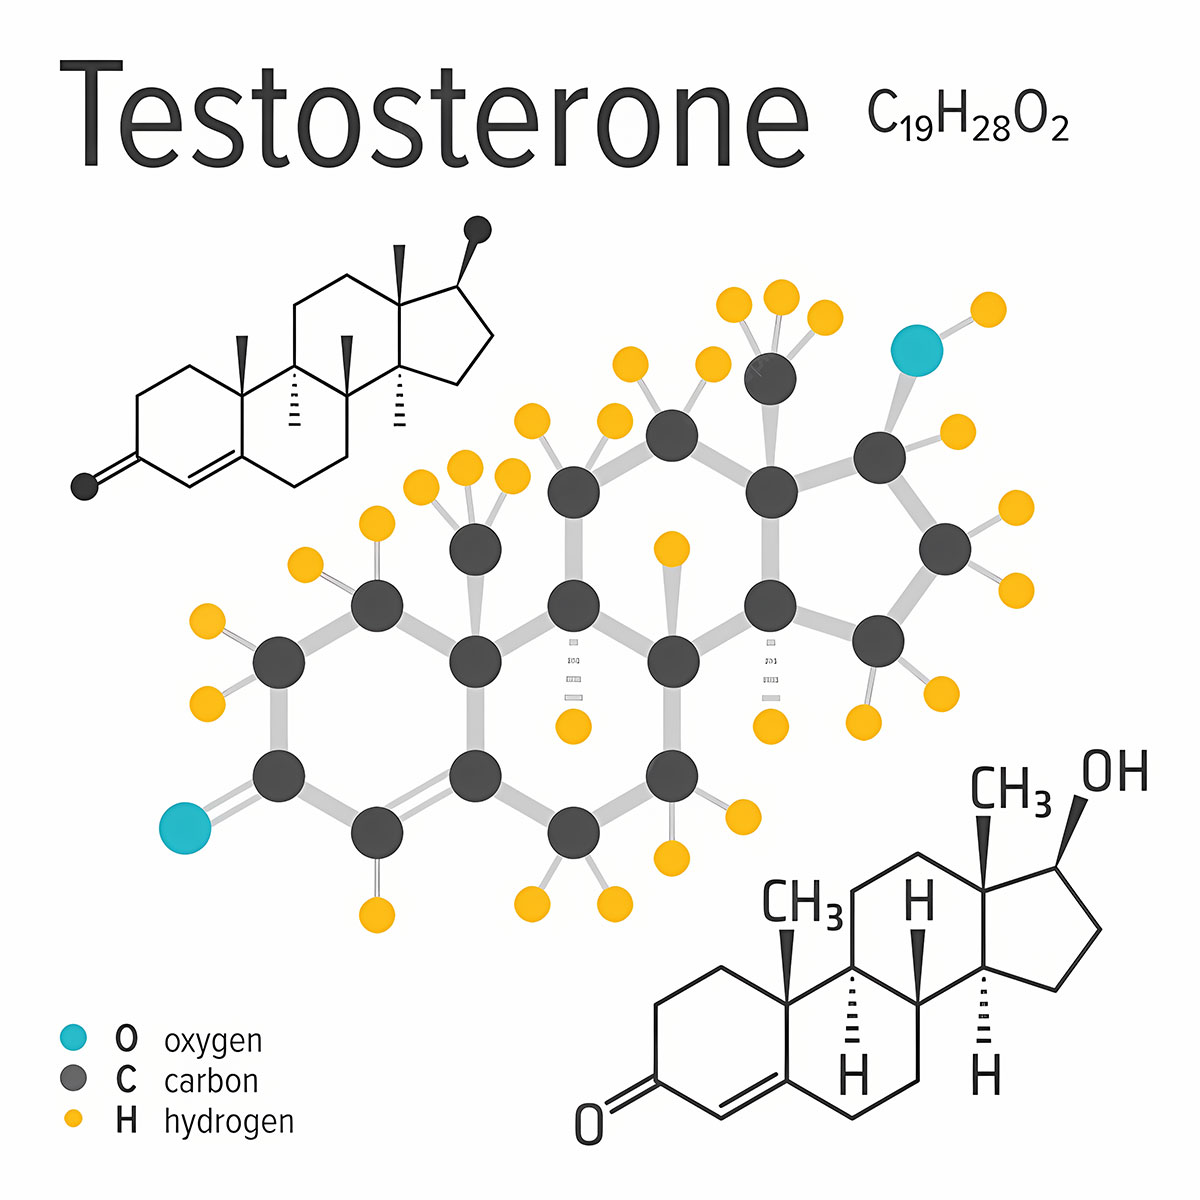 Introduction to Testosterone in Women